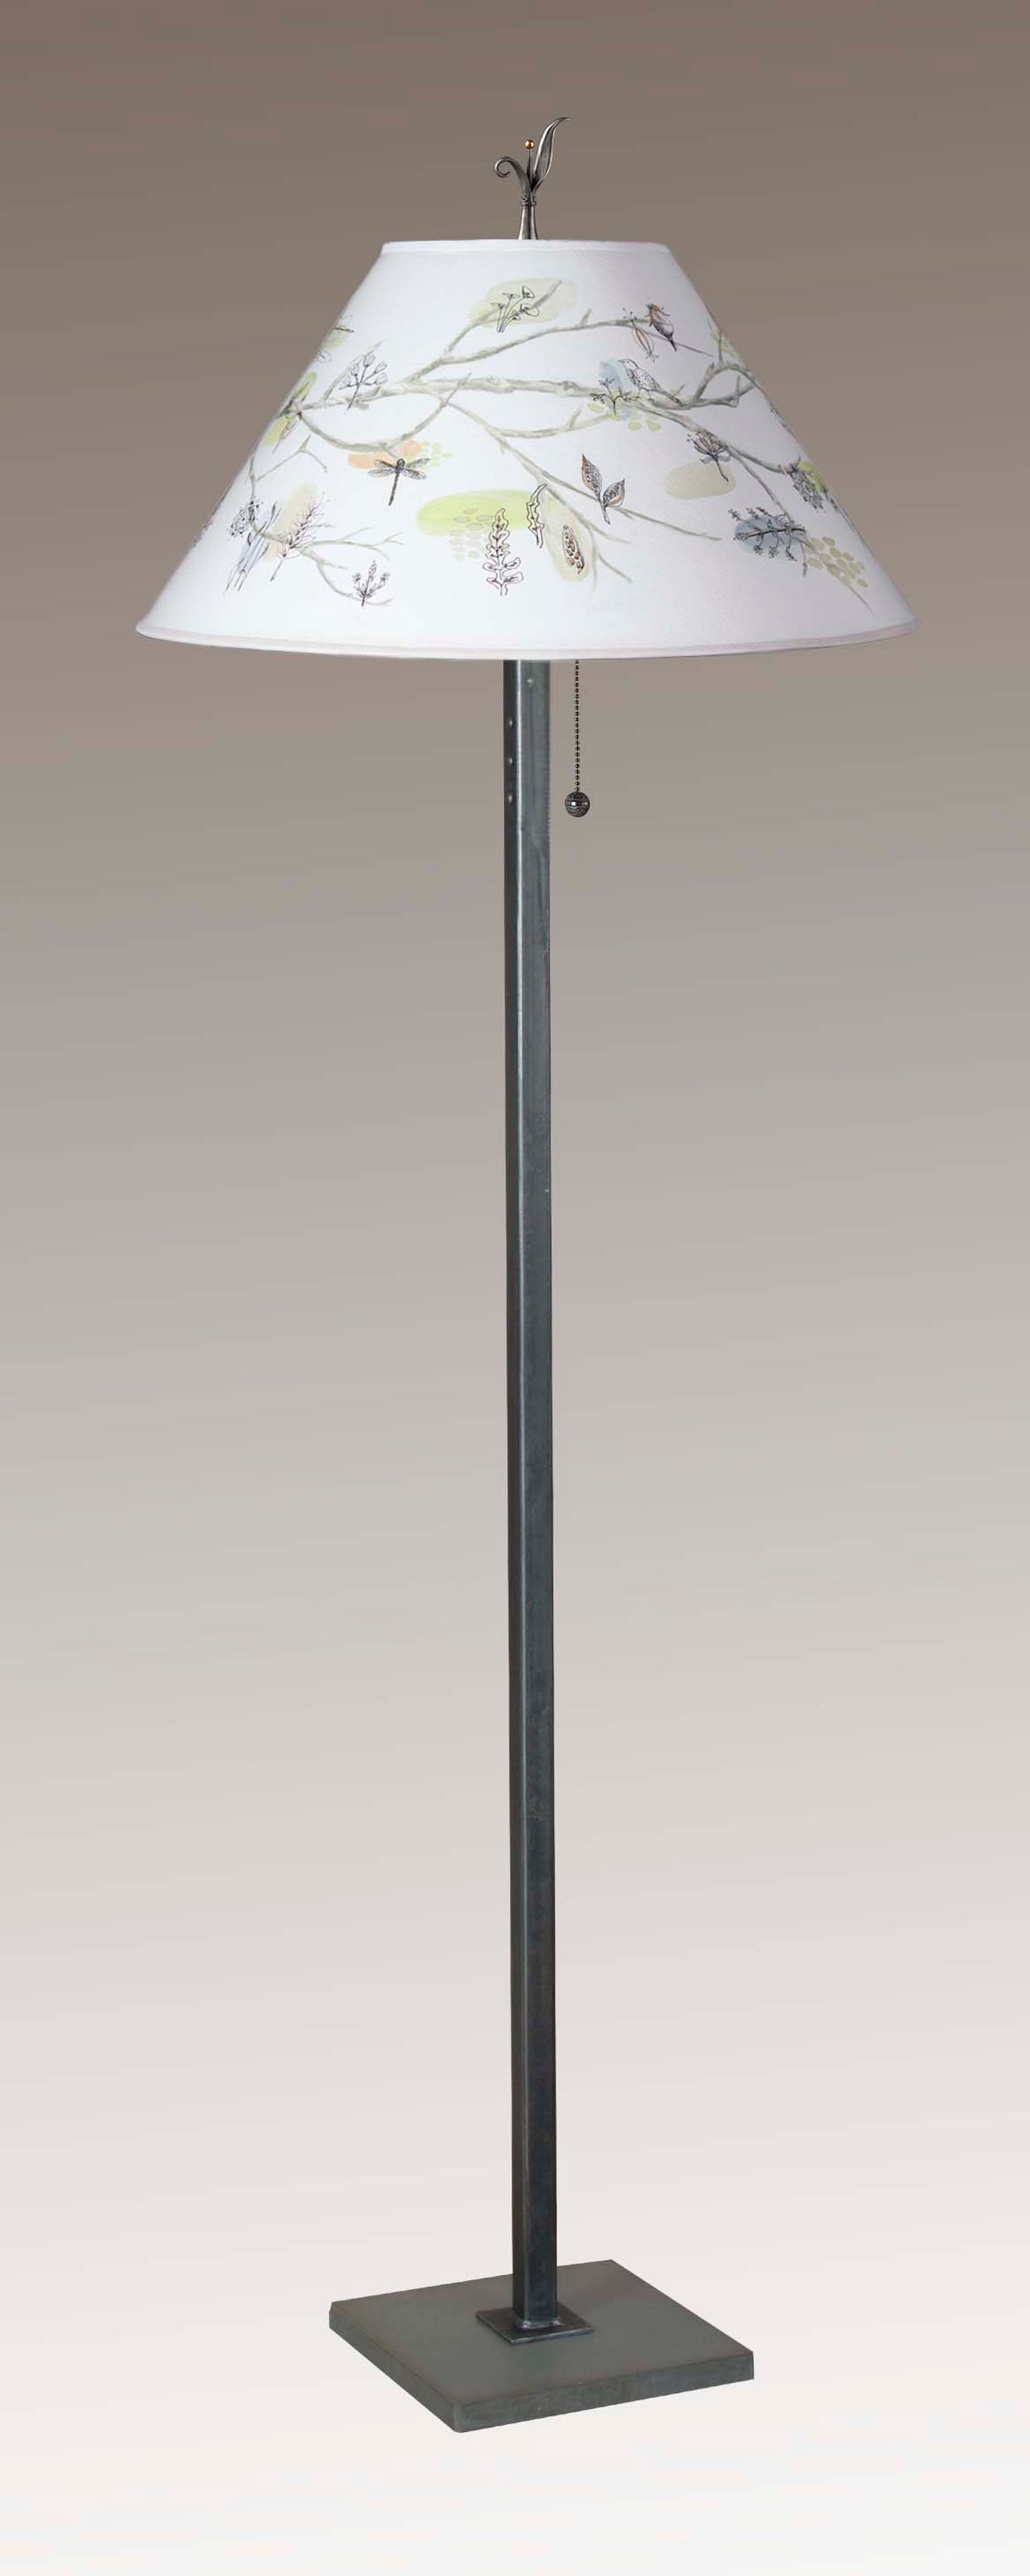 Steel Floor Lamp with Large Conical Shade in Artful Branch